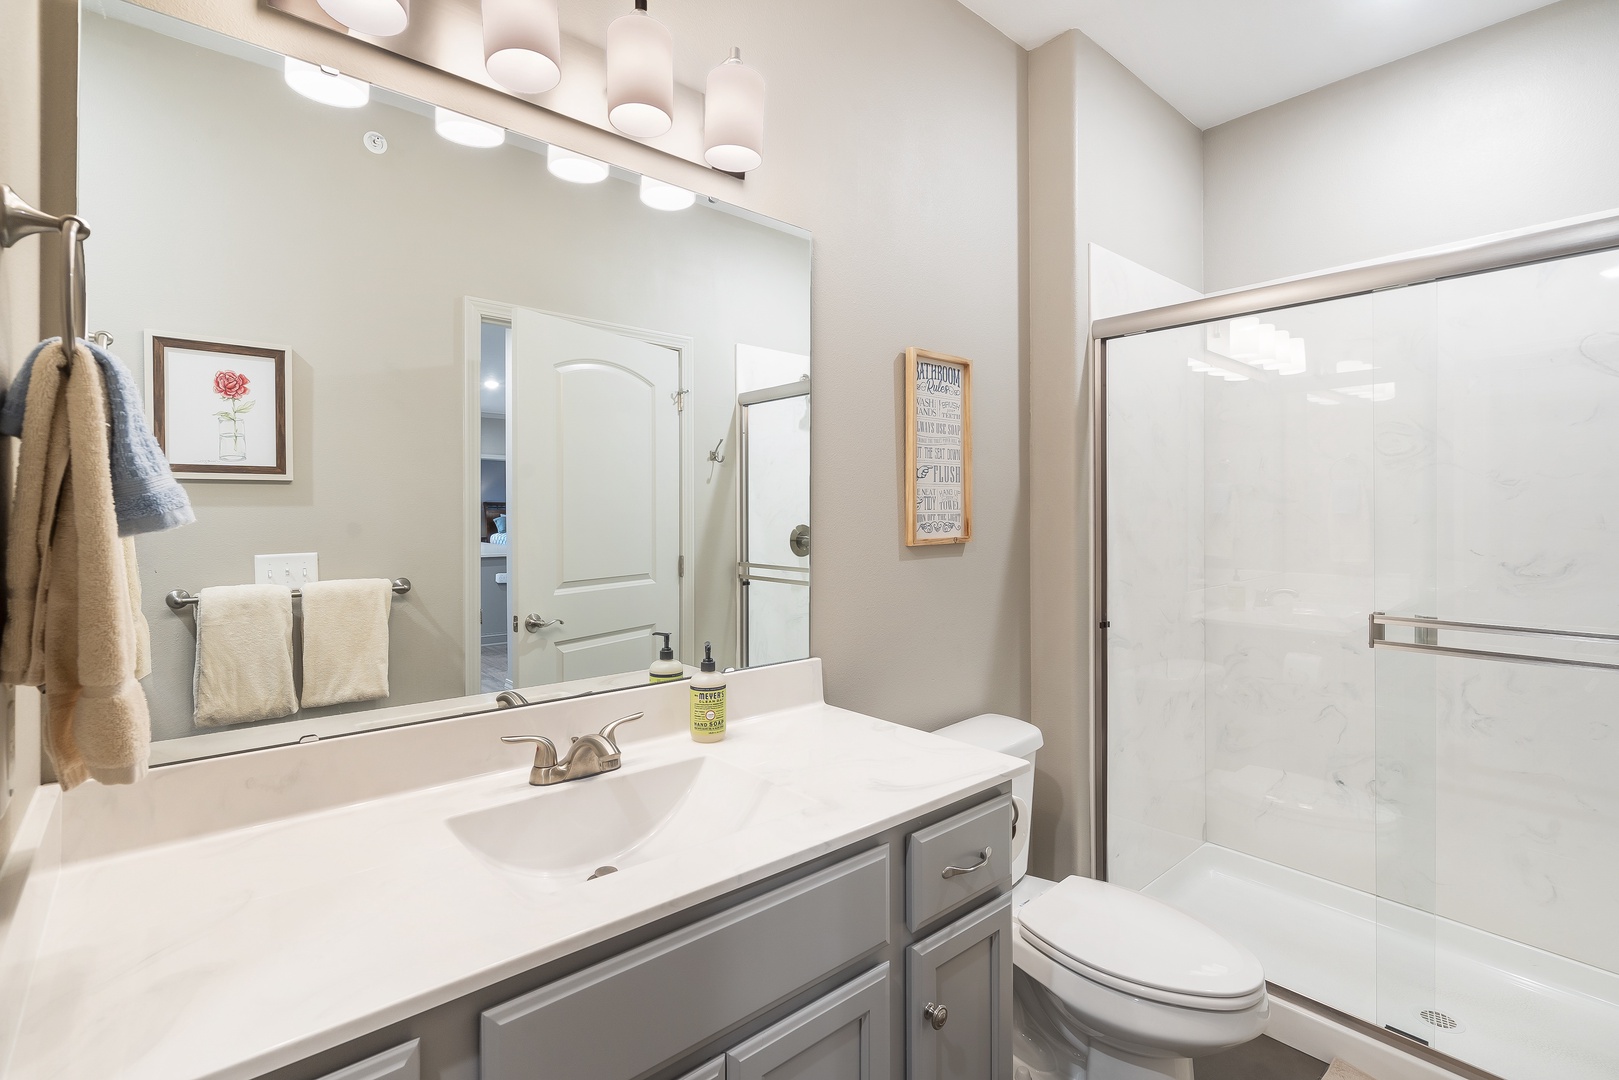 This serene ensuite offers a single vanity & glass shower